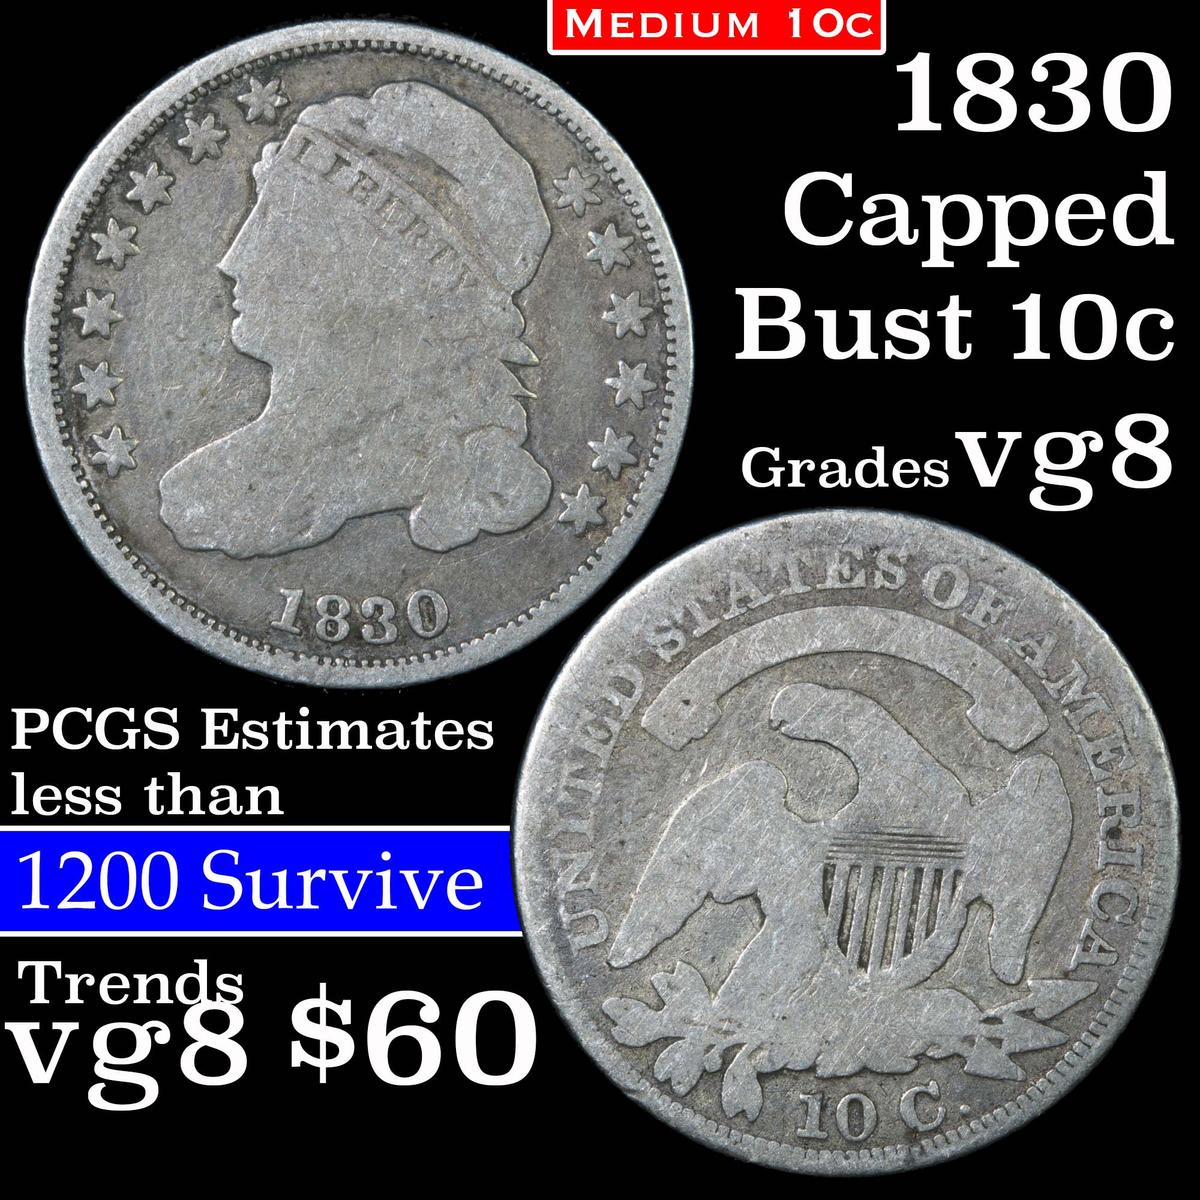 1830 Capped Bust Dime 10c Grades vg, very good